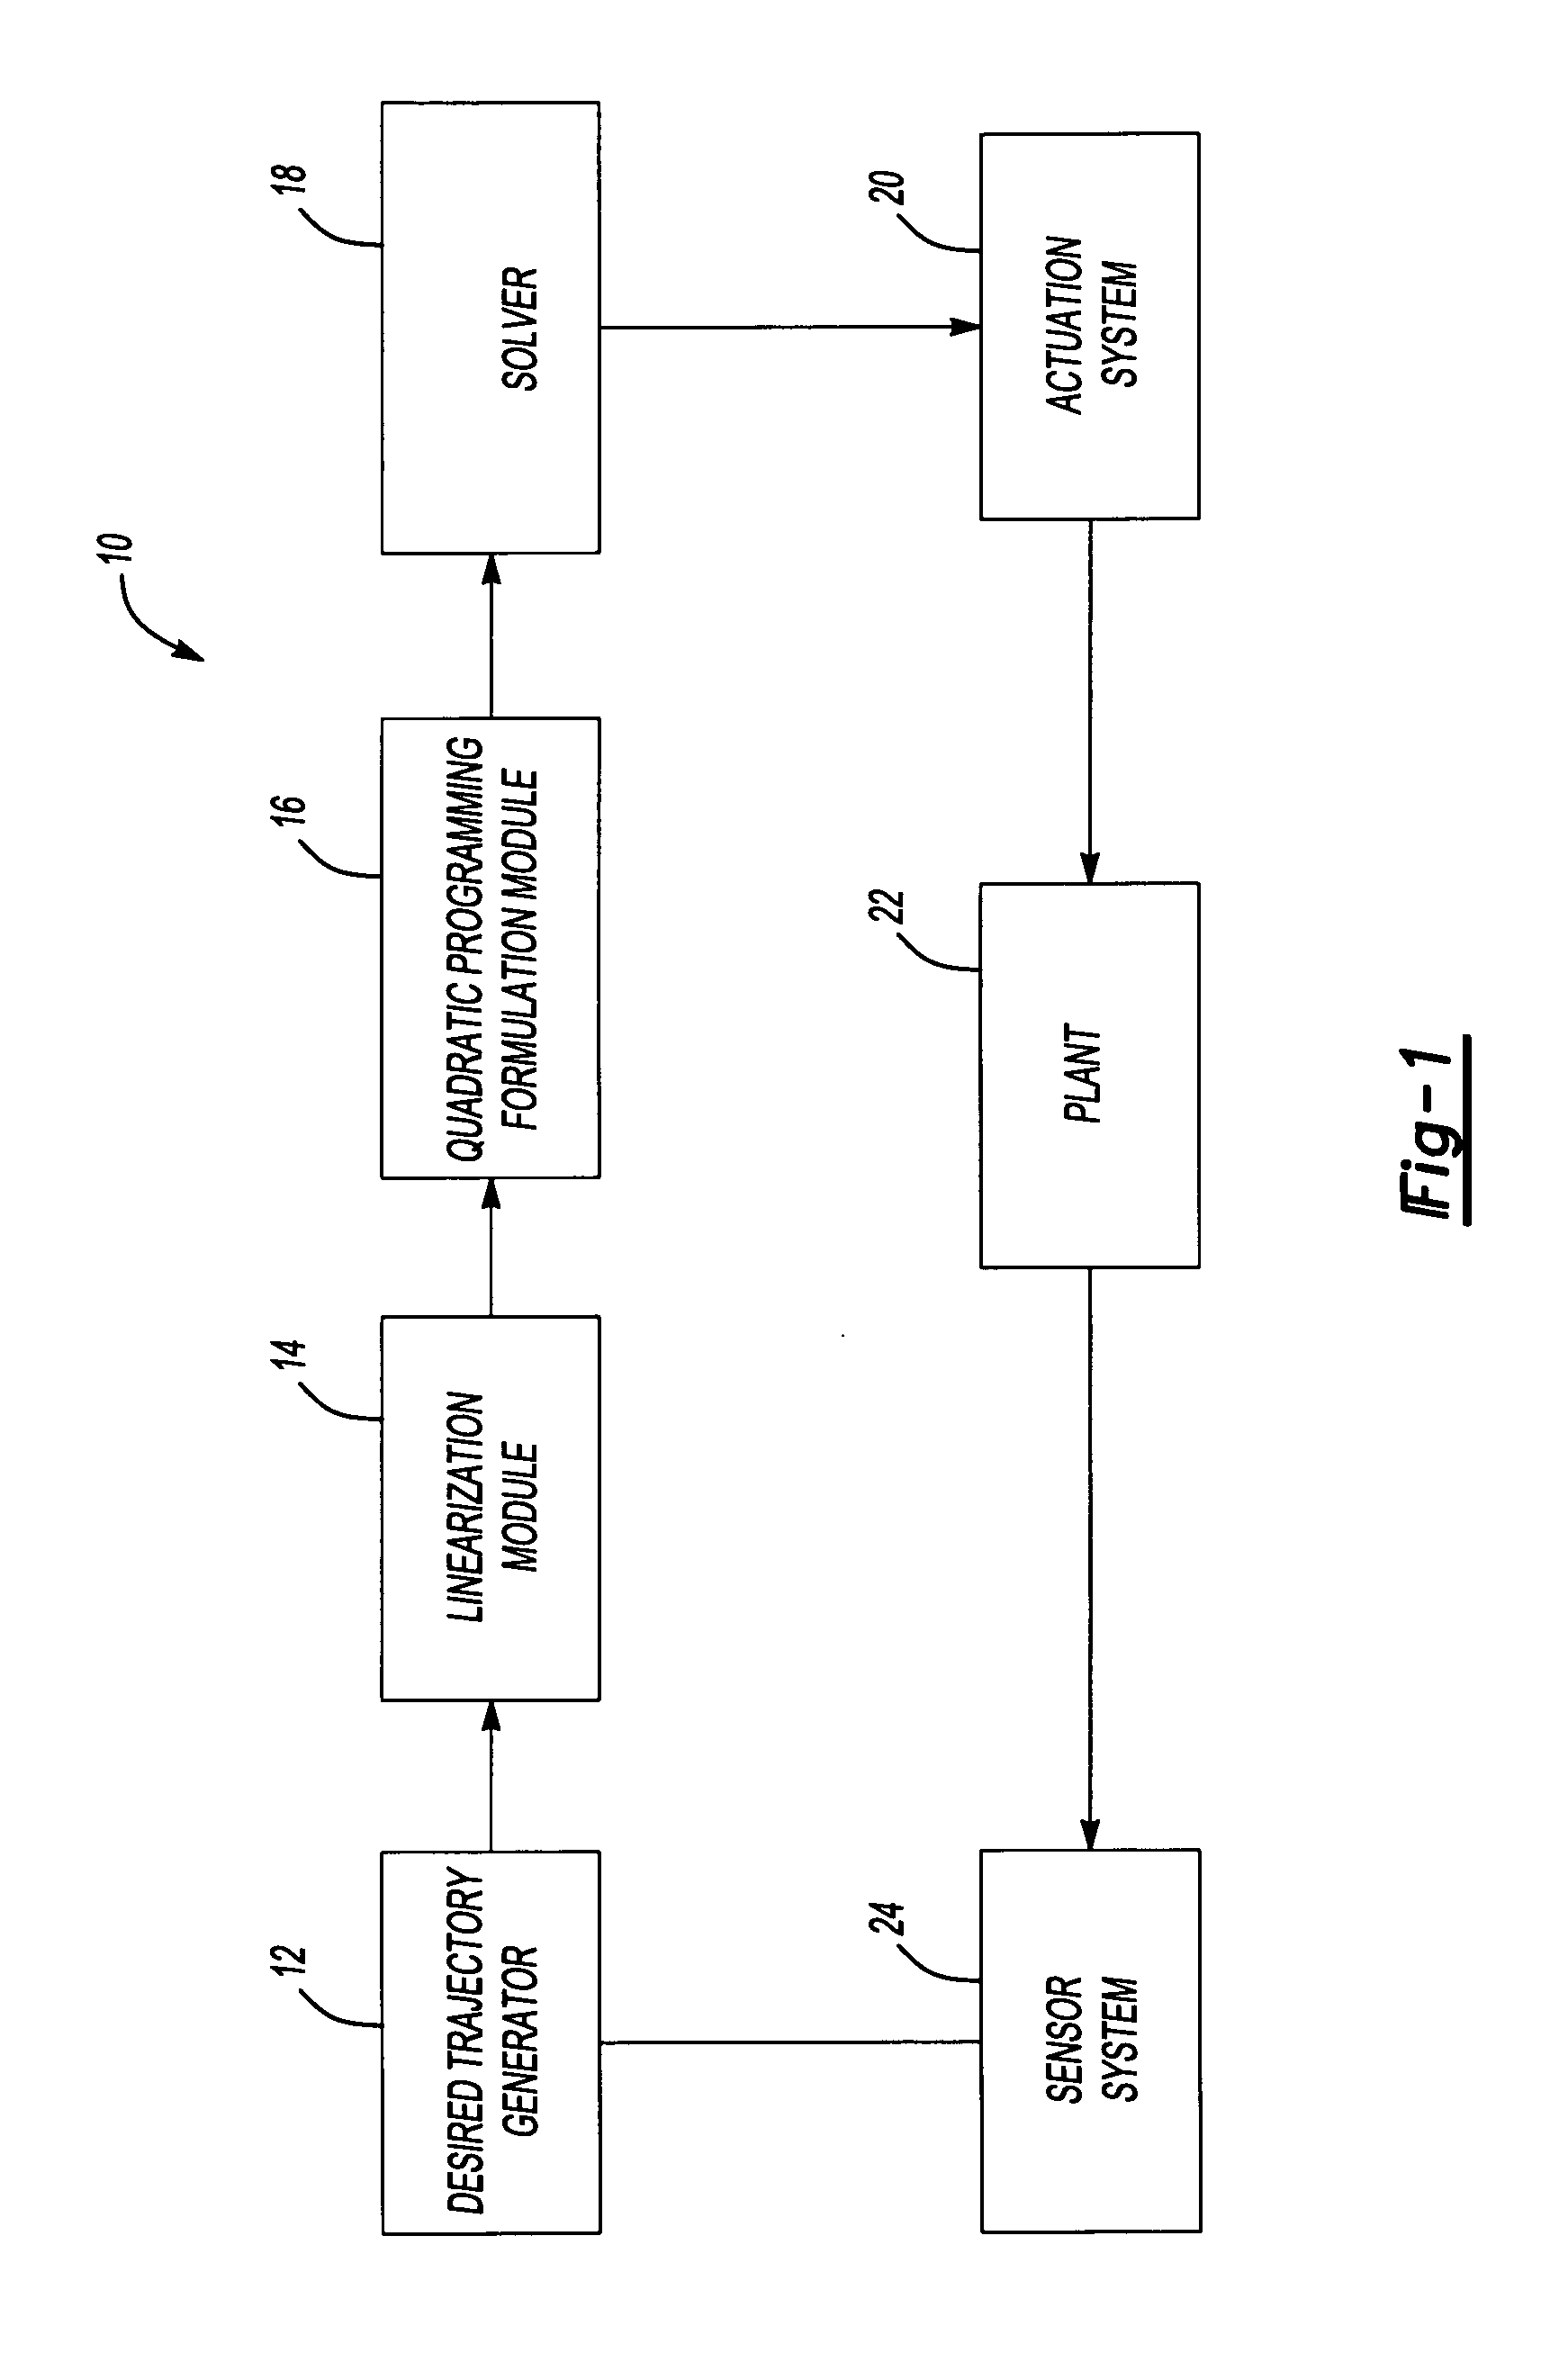 System and method for solving equality-constrained quadratic program while honoring degenerate constraints